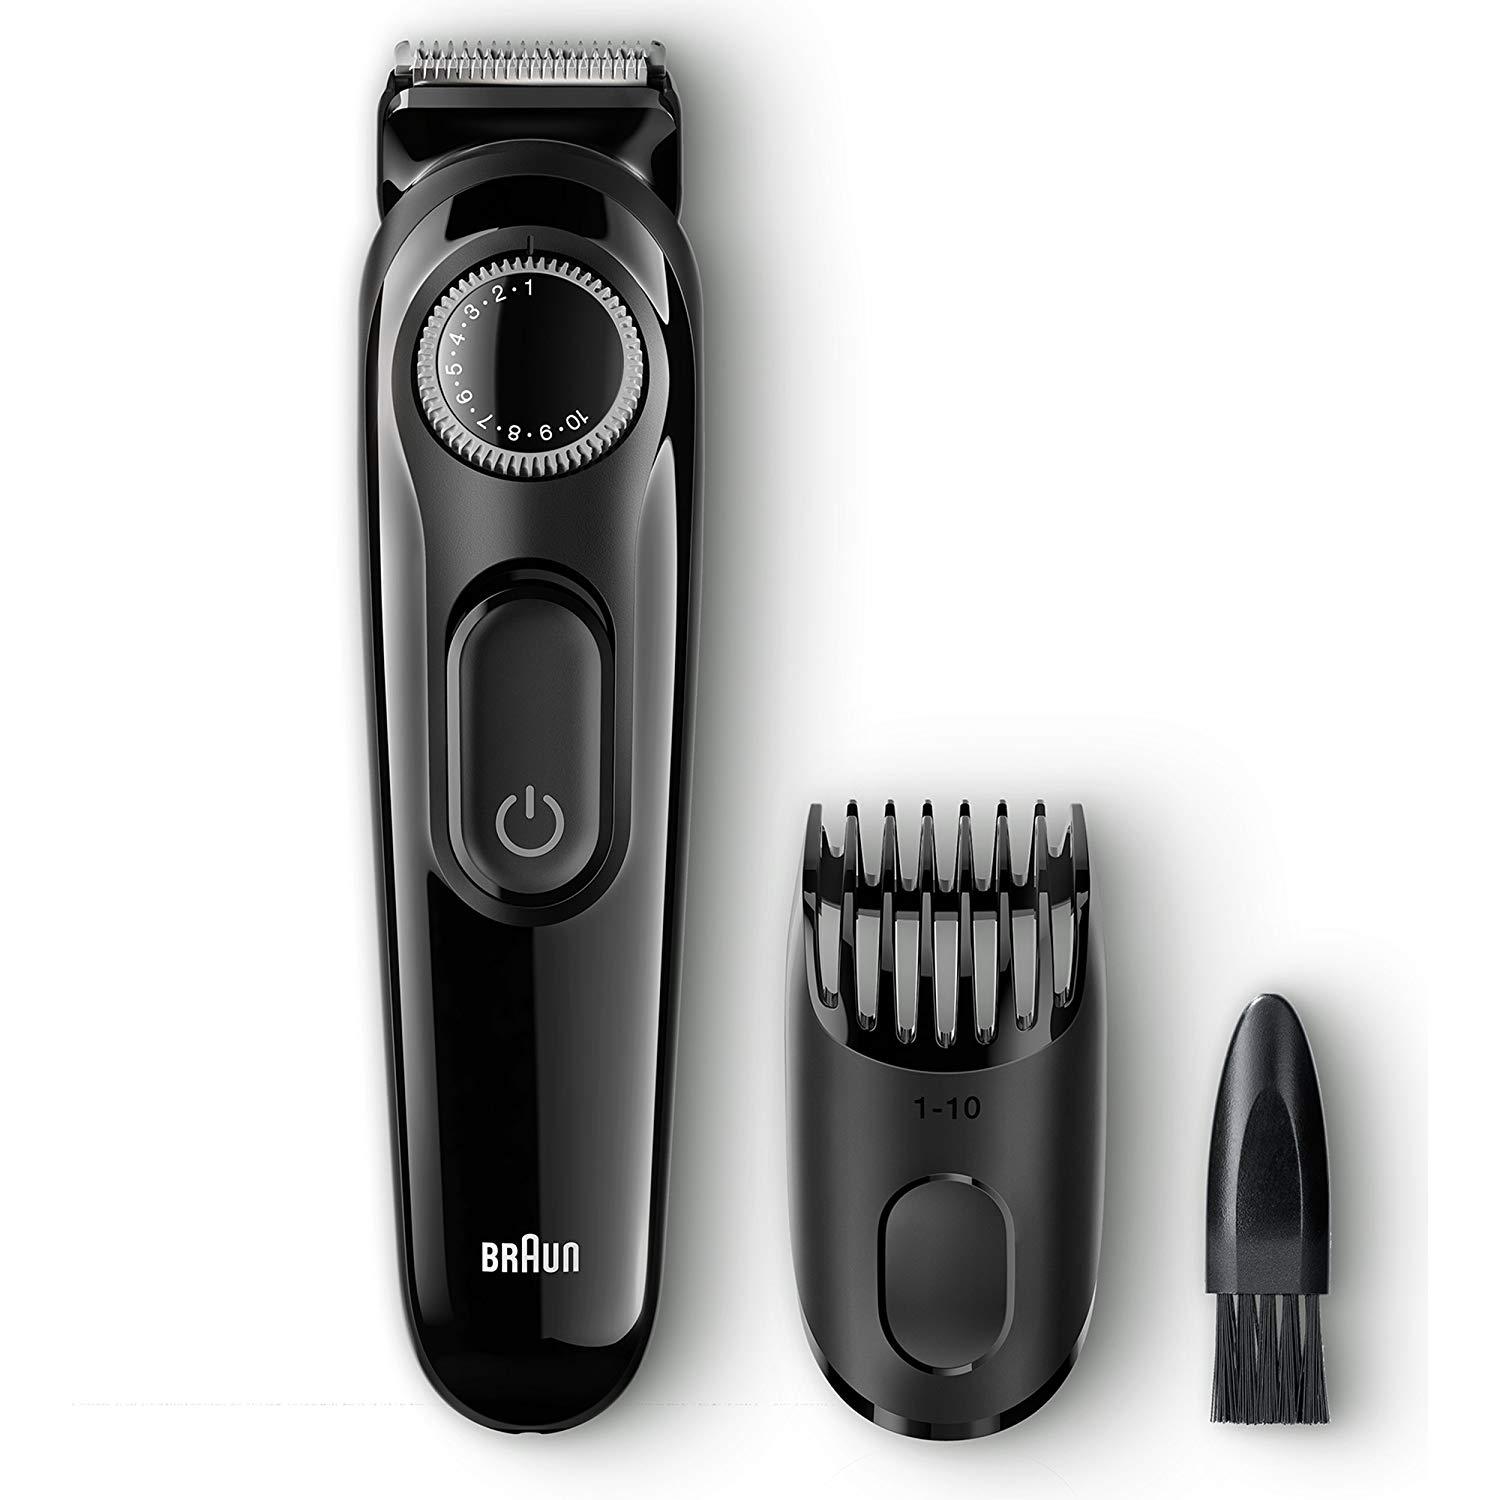 philips one blade face pro